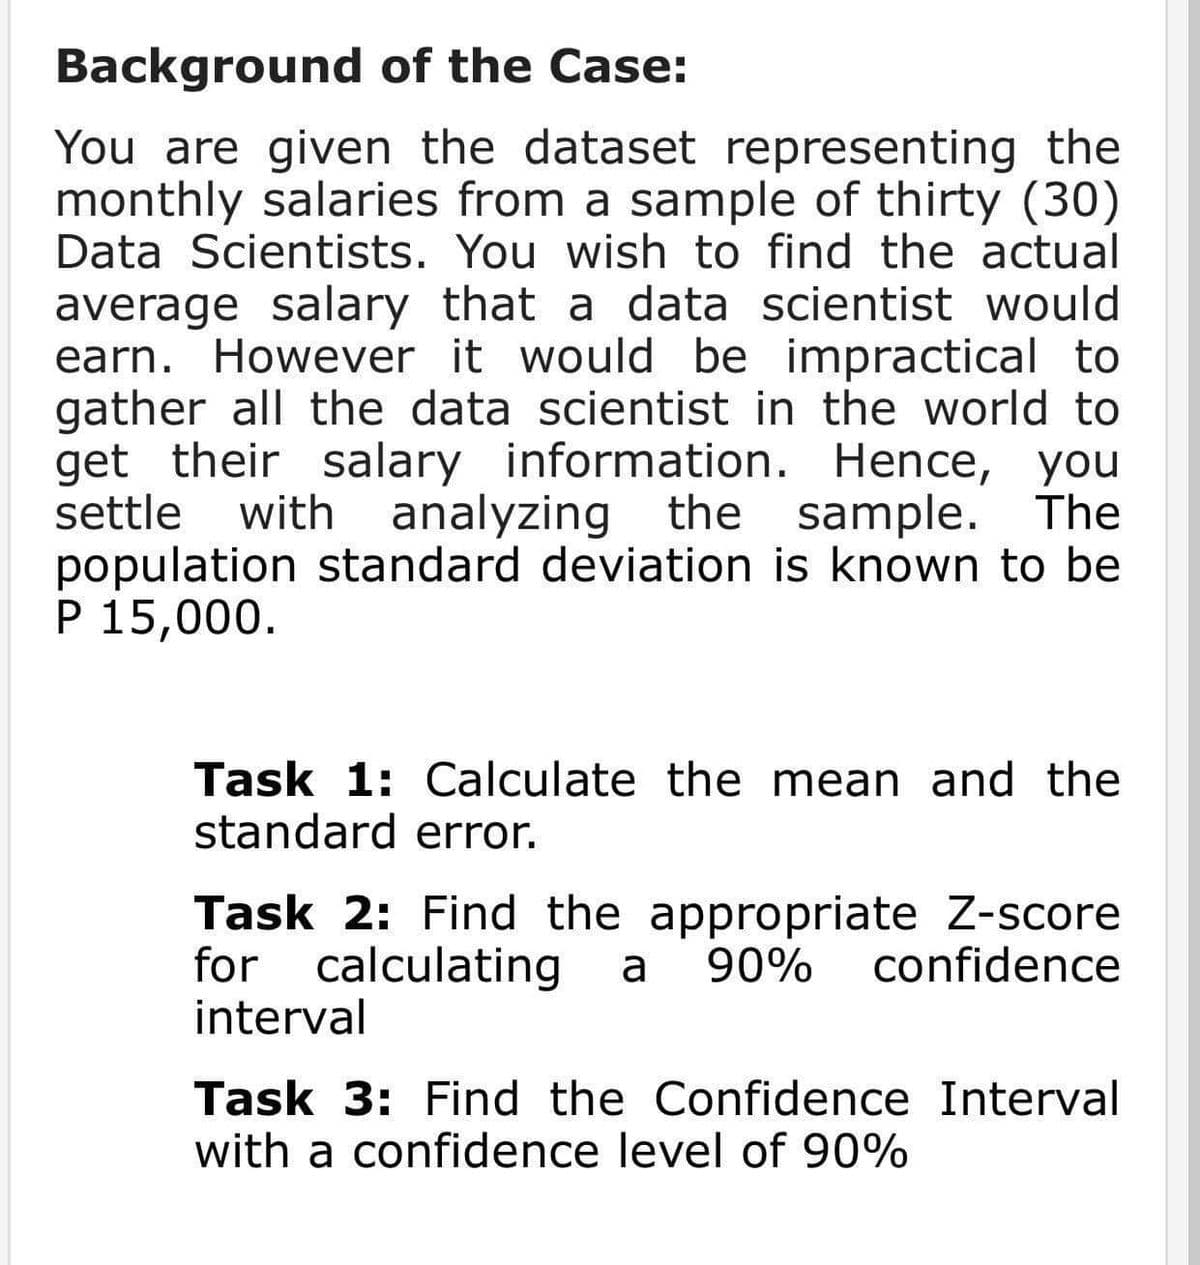 Background of the Case:
You are given the dataset representing the
monthly salaries from a sample of thirty (30)
Data Scientists. You wish to find the actual
average salary that a data scientist would
earn. However it would be impractical to
gather all the data scientist in the world to
get their salary information. Hence, you
settle
with analyzing the sample. The
population standard deviation is known to be
P 15,000.
Task 1: Calculate the mean and the
standard error.
Task 2: Find the appropriate Z-score
for calculating
interval
a
90%
confidence
Task 3: Find the Confidence Interval
with a confidence level of 90%
